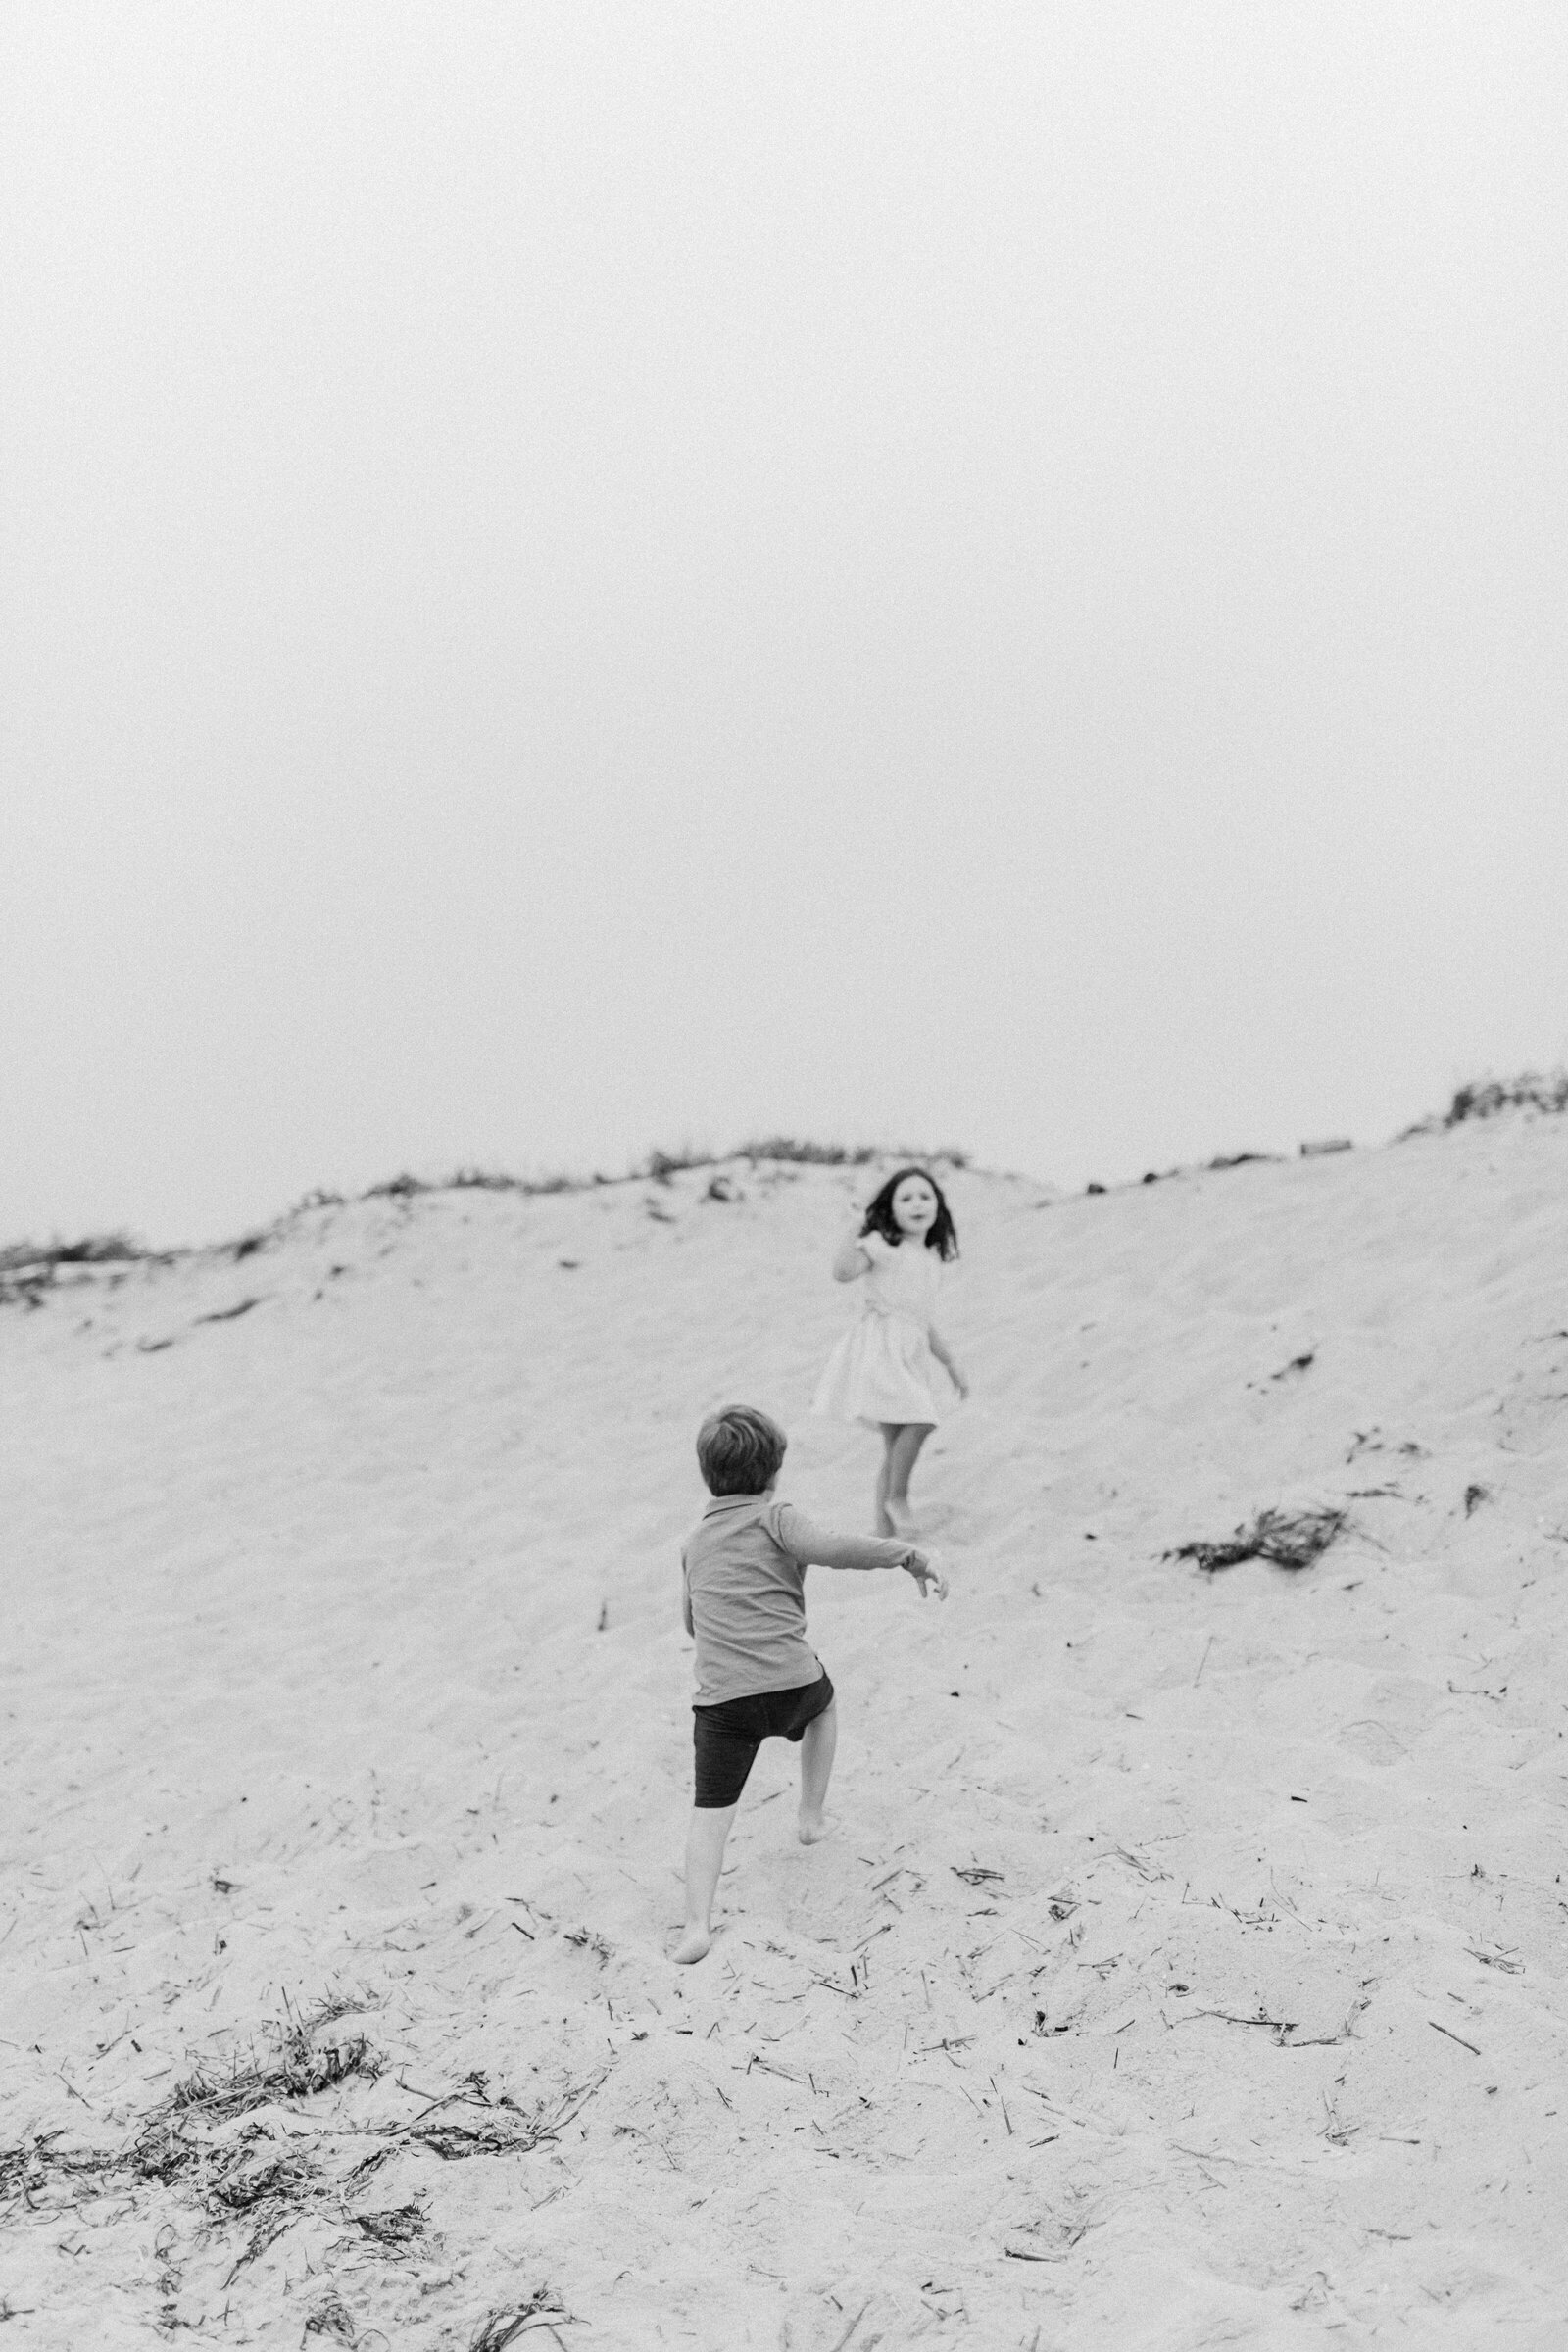 A black and white image of a young boy and girl climbing up a hill at the beach